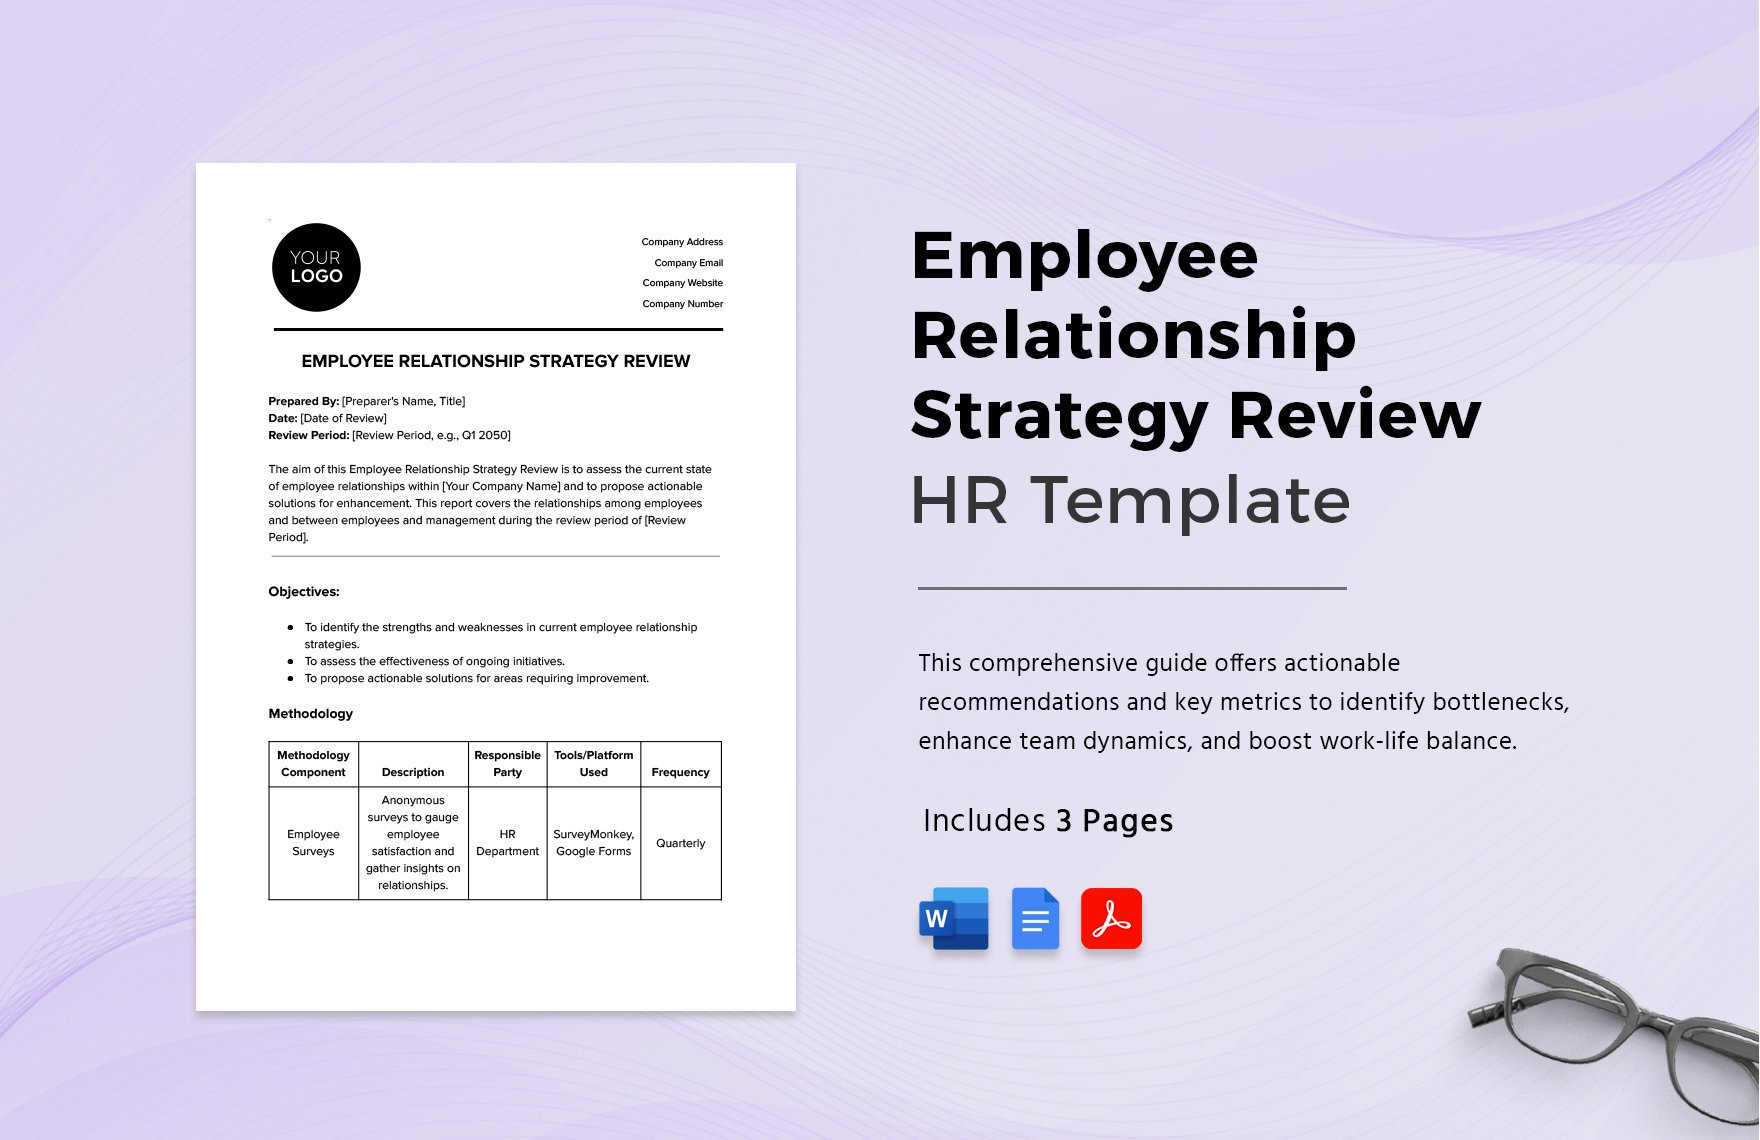 Employee Relationship Strategy Review HR Template